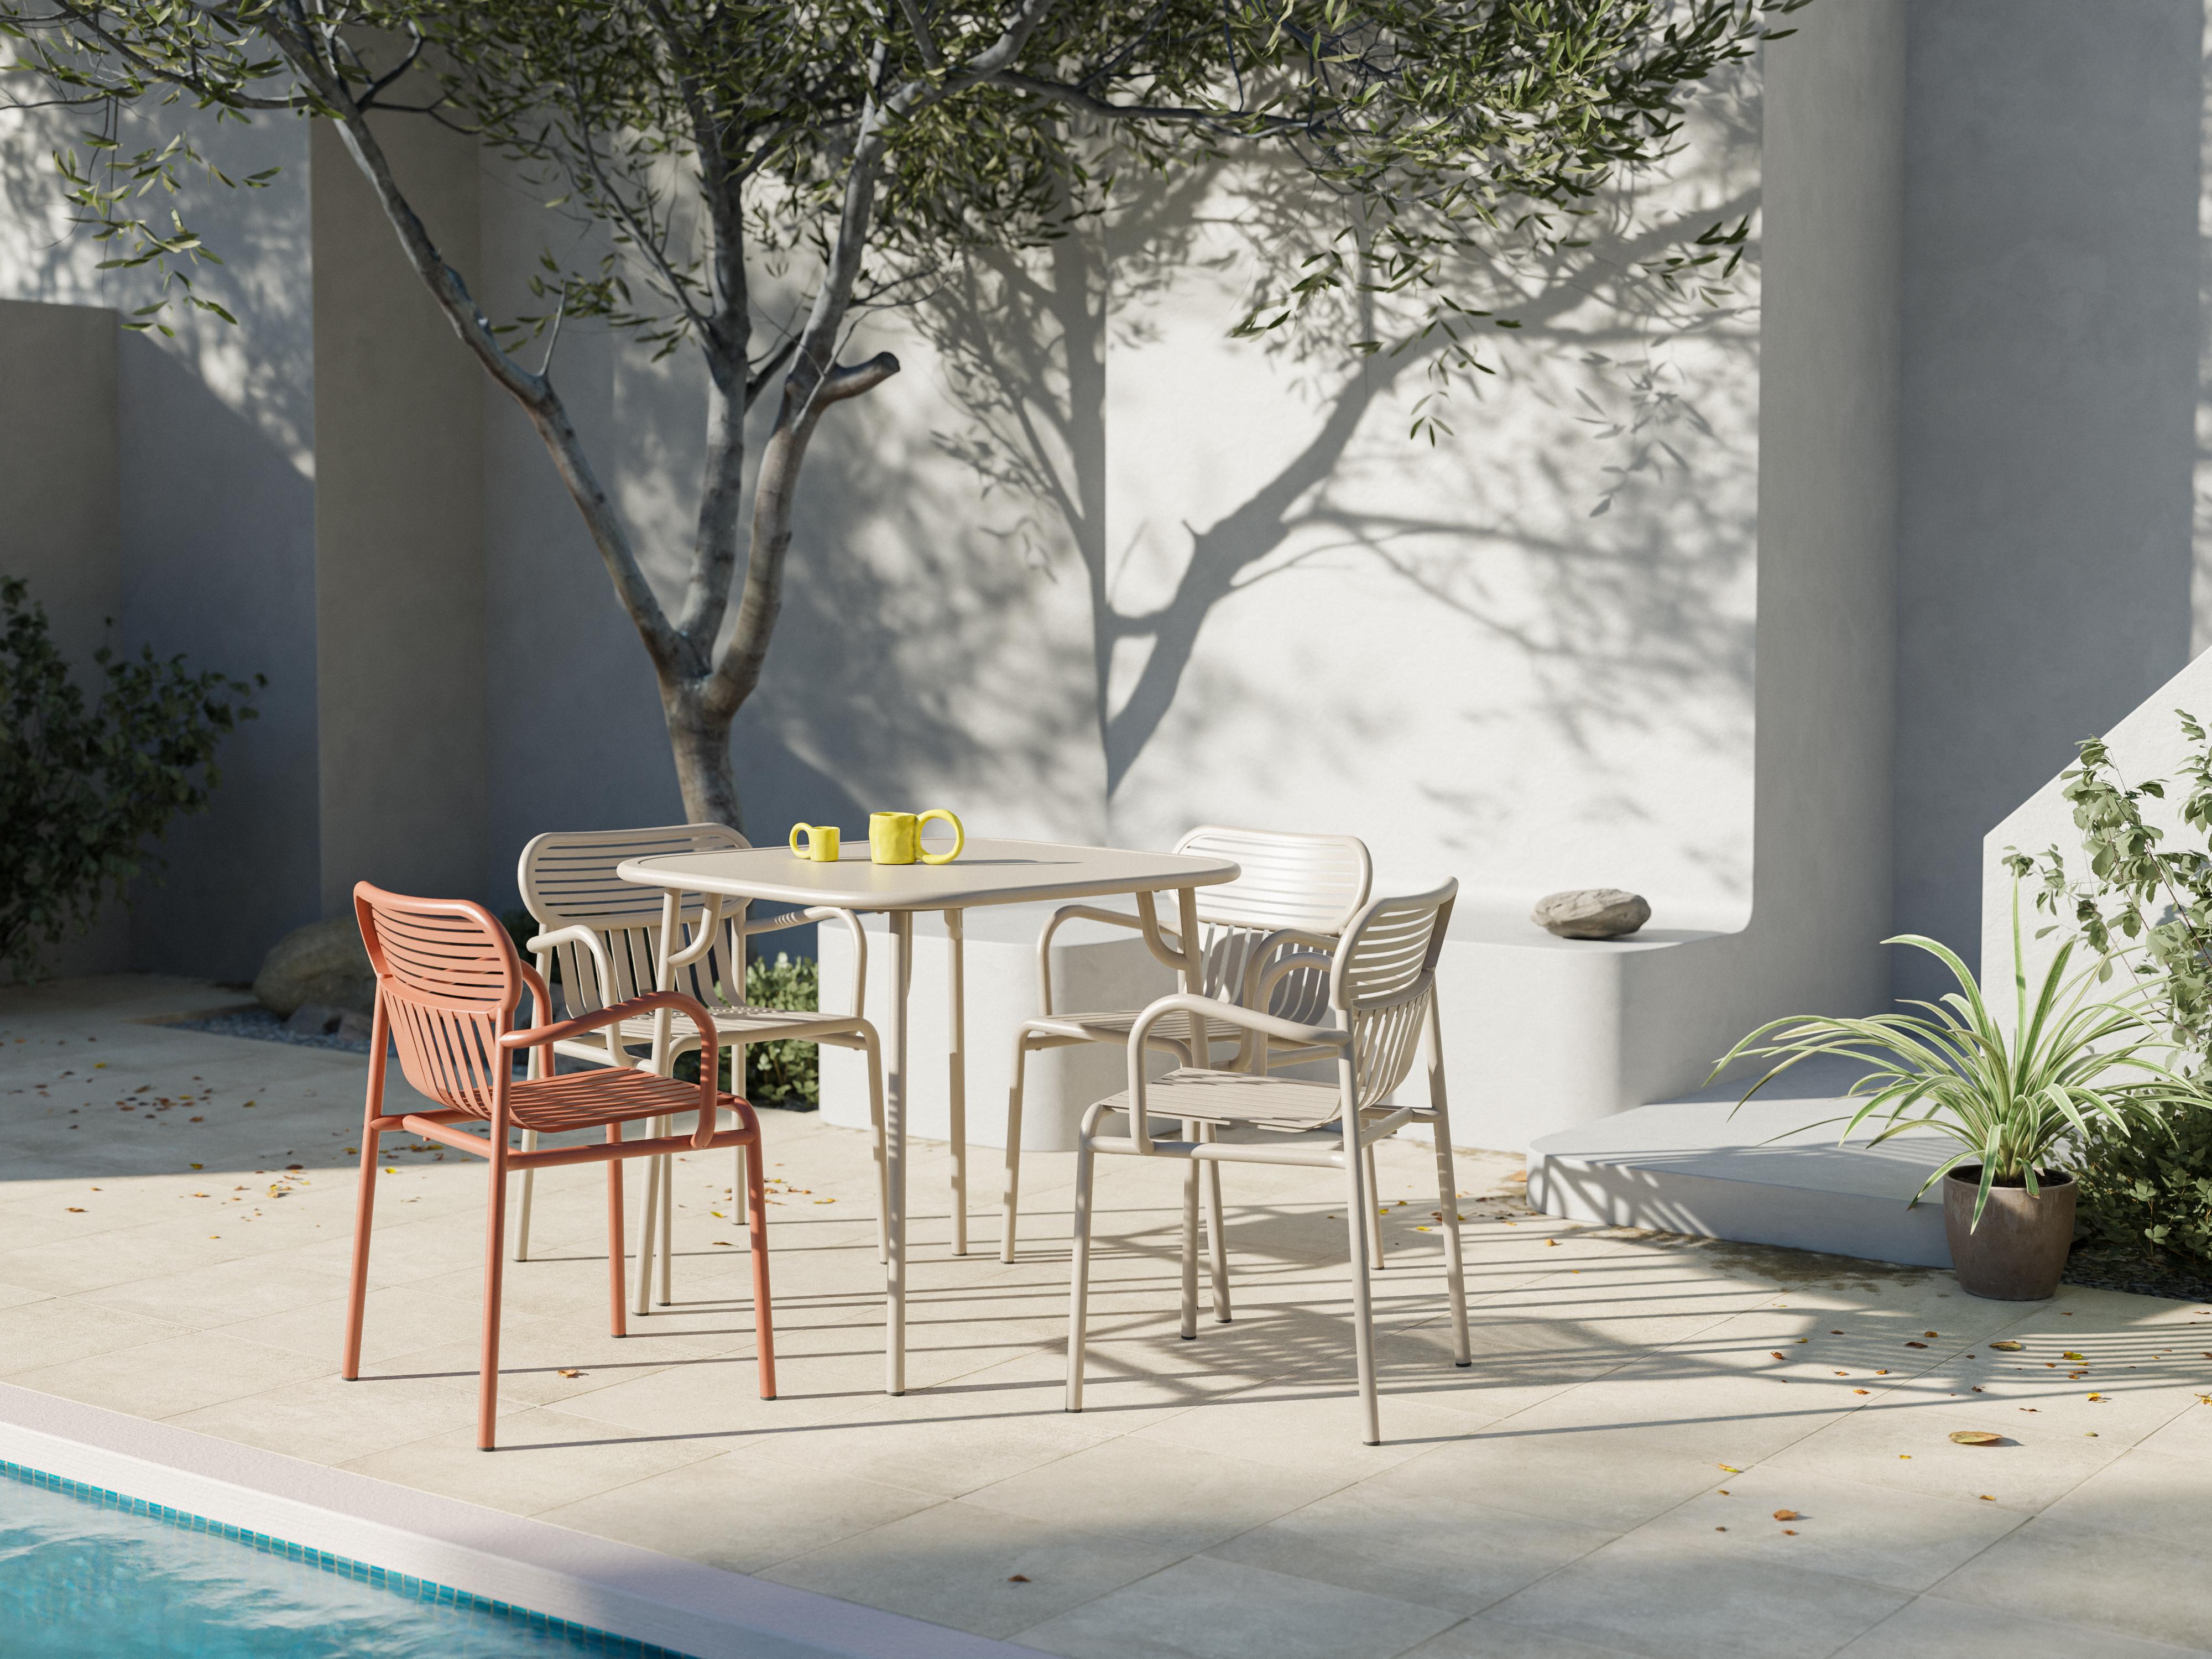 Petite Friture Week-End Plain Square Dining Table in Coral Aluminium by Studio BrichetZiegler, 2017

The week-end collection is a full range of outdoor furniture, in aluminium grained epoxy paint, matt finish, that includes 18 functions and 8